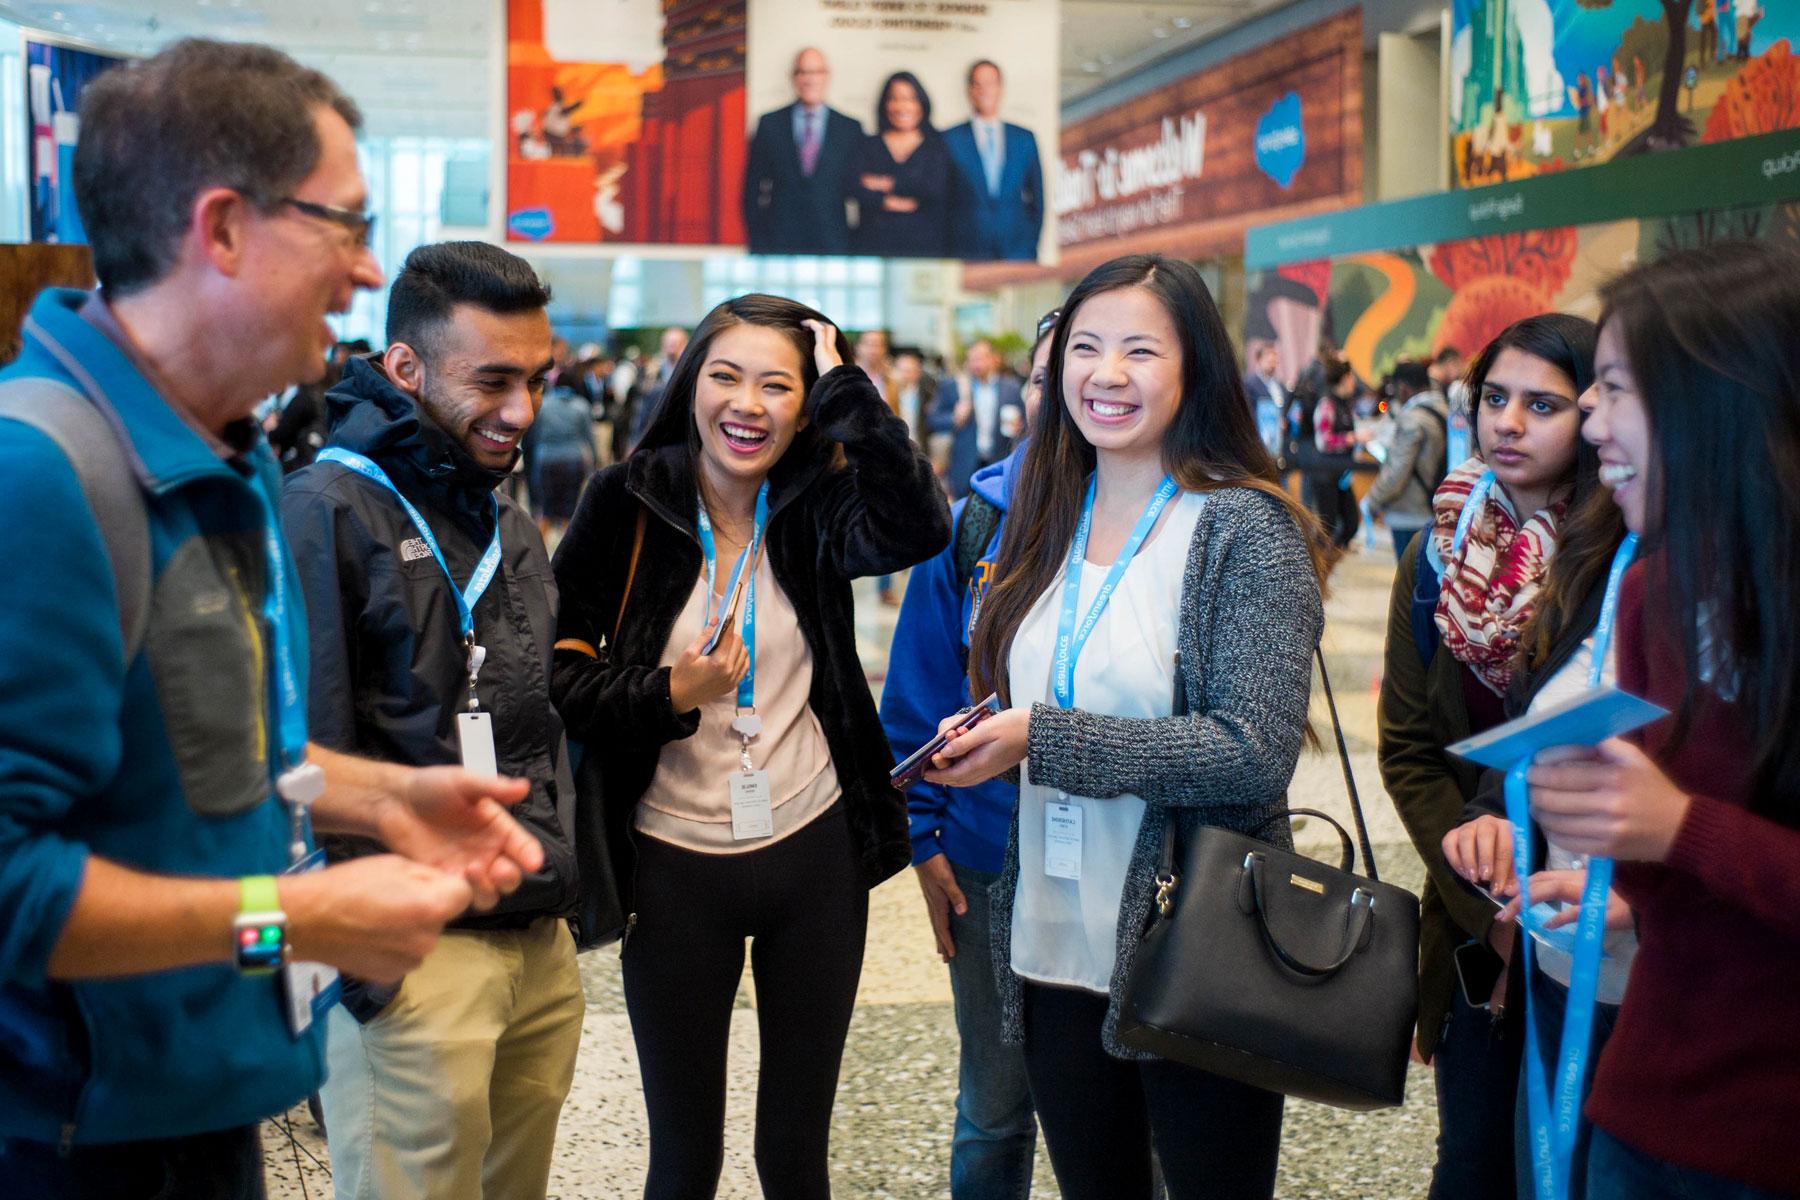 Students laughing while chatting at a Salesforce conference.